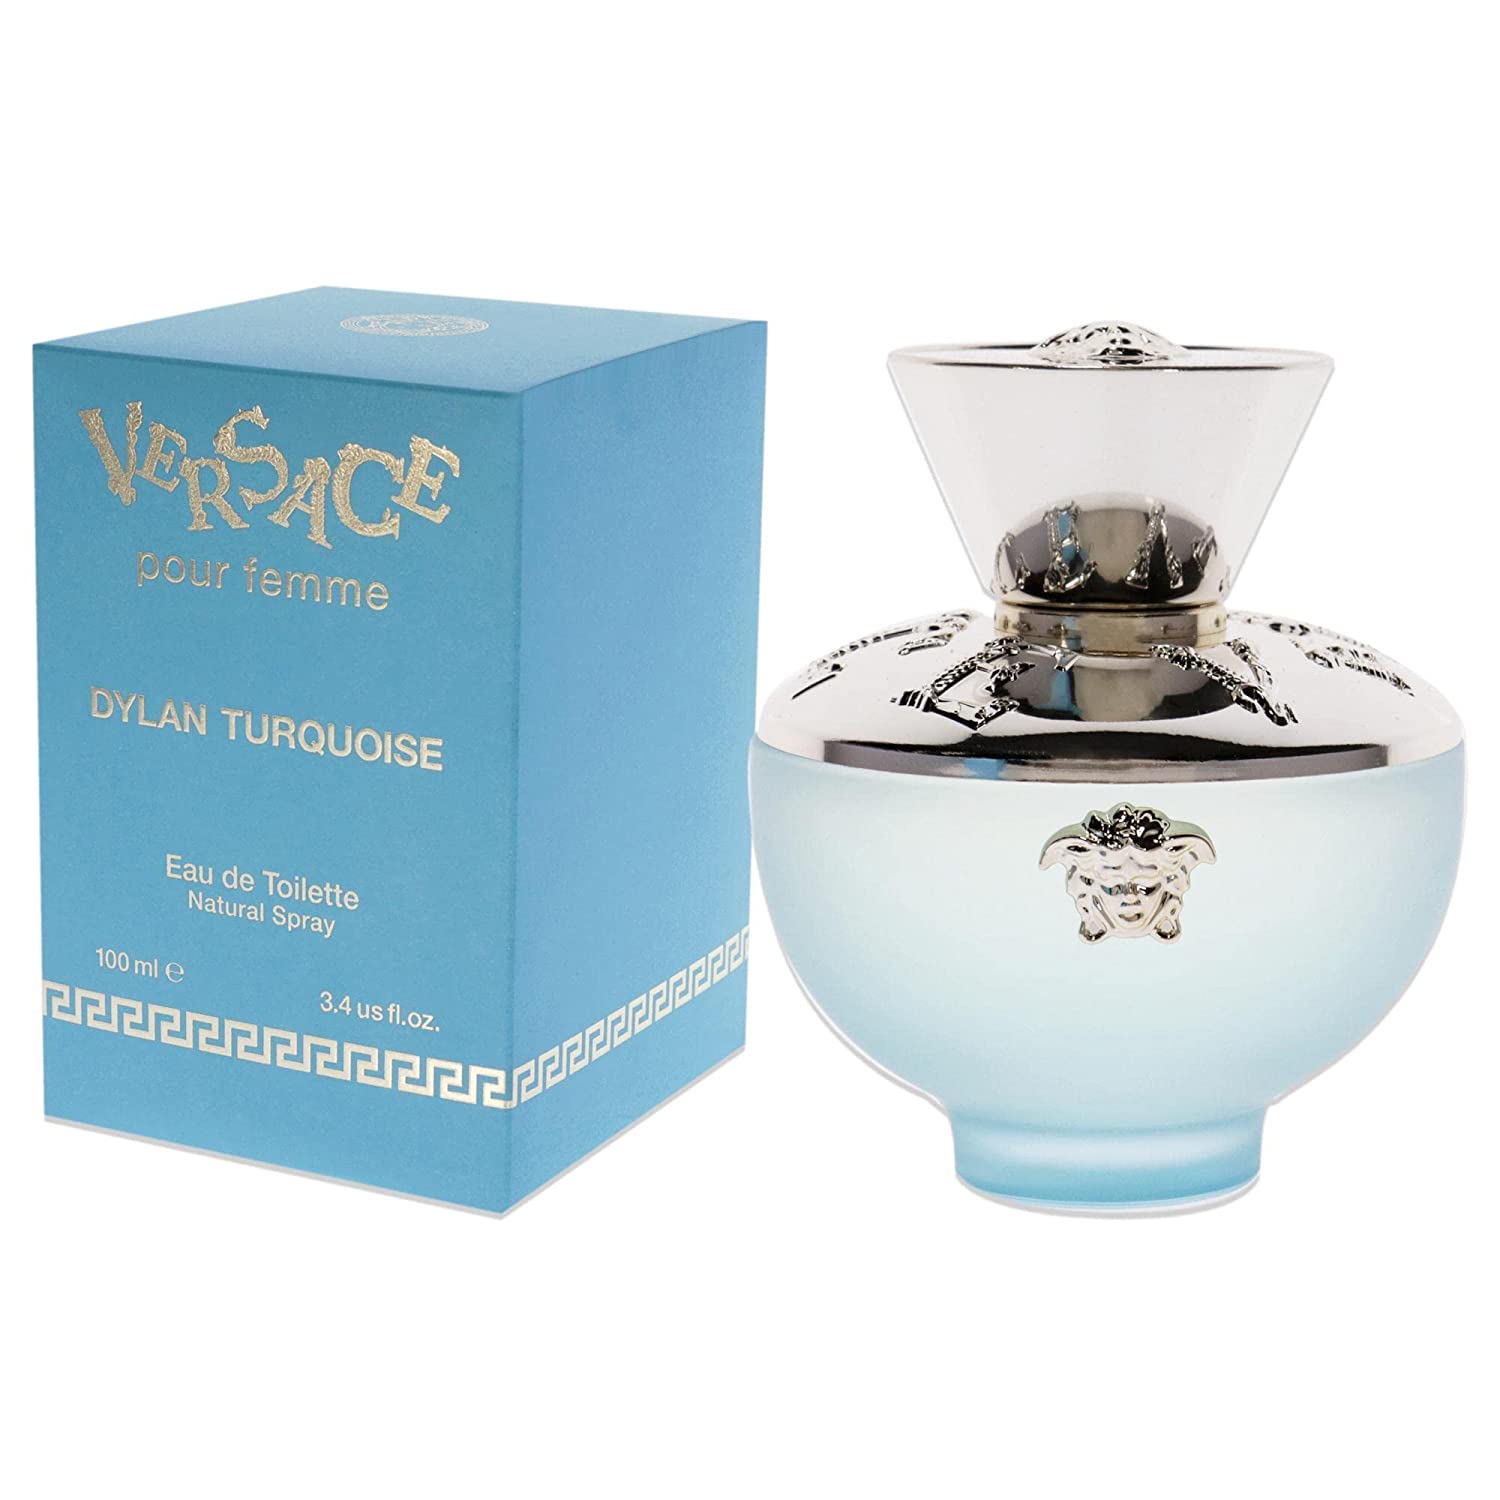 VERSACE DYLAN TURQUOISE POUR FEMME EDT 100 ML